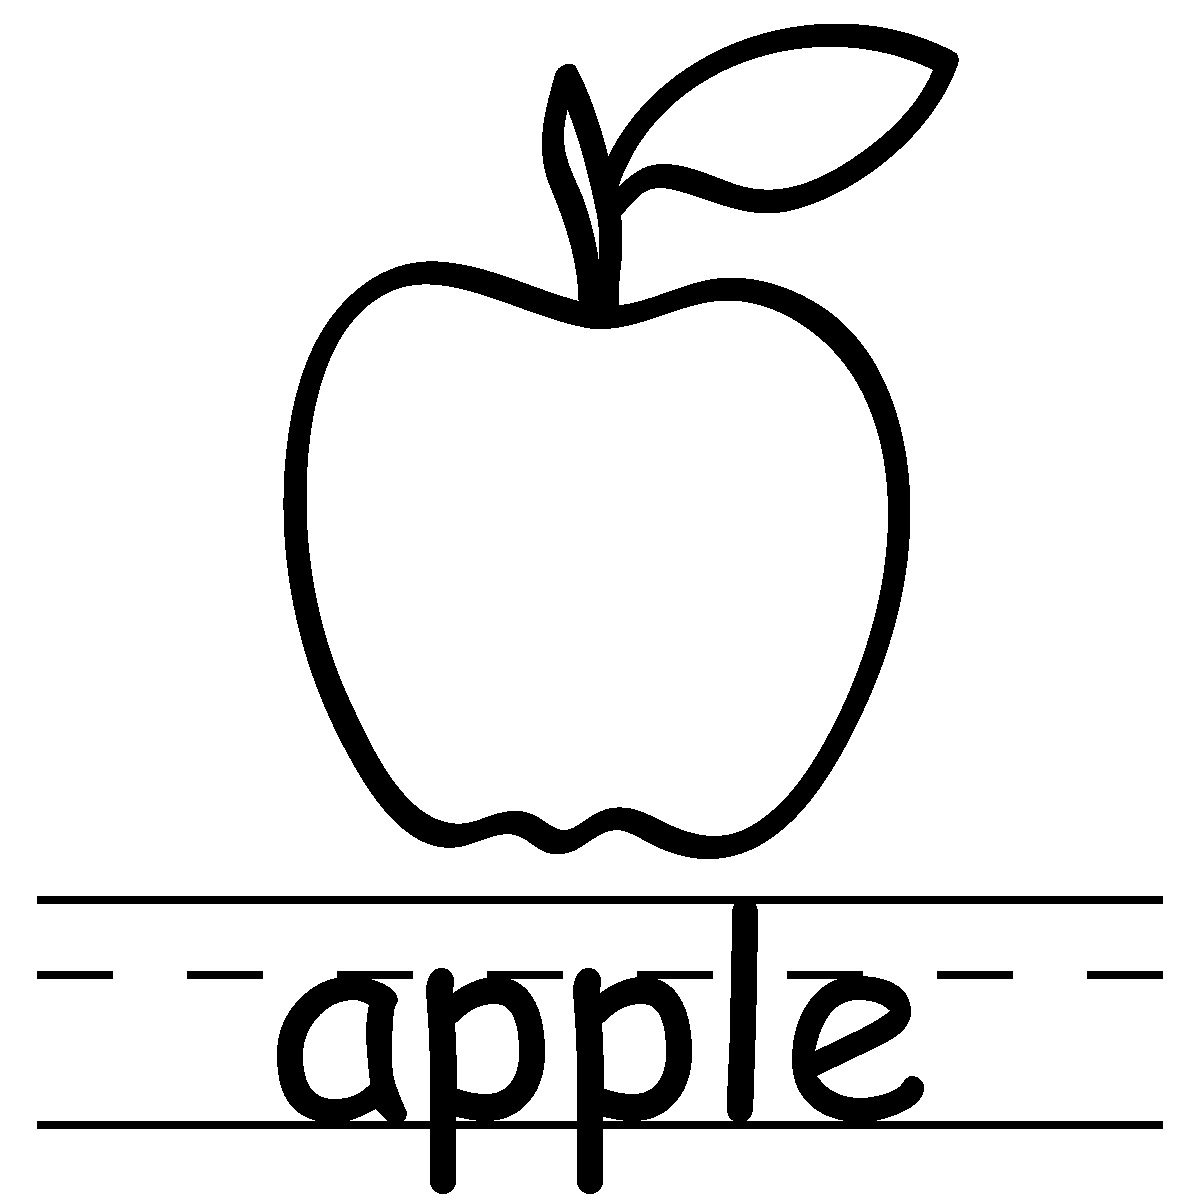 Apple black and white apple clipart black and white fruit clipart ...